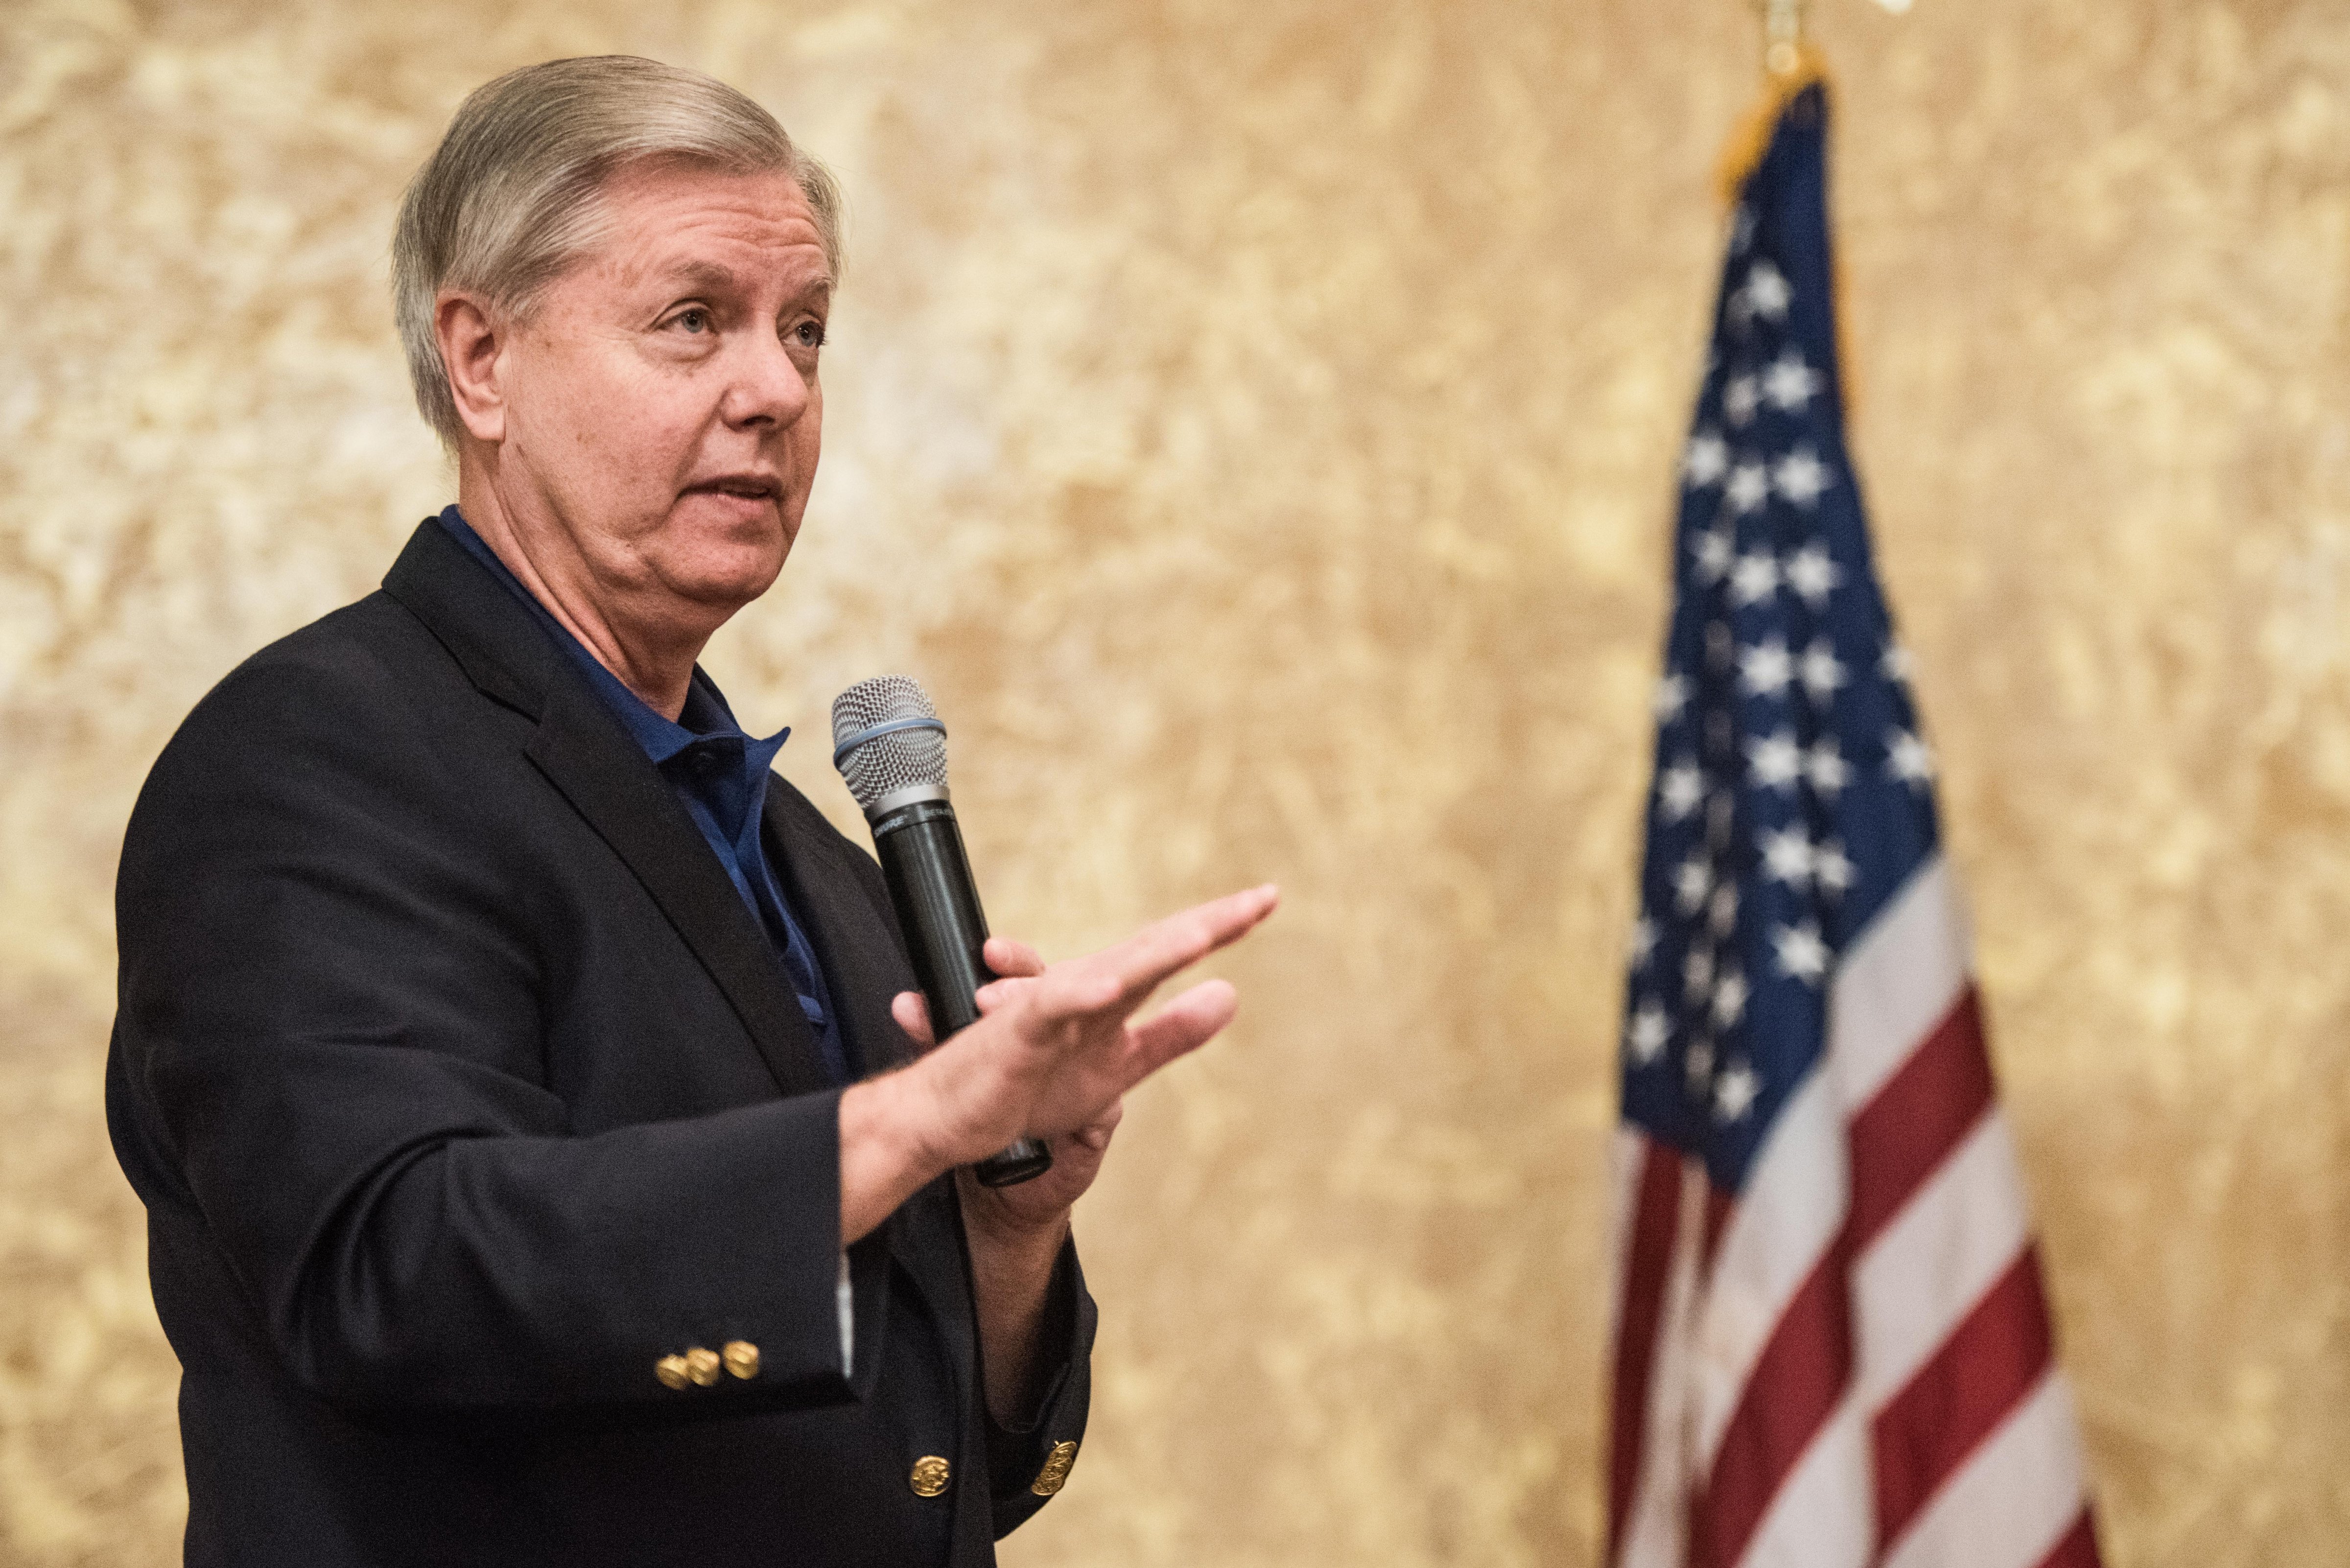 Sen. Lindsey Graham addresses constituents during a town hall meeting March 25, 2017 in Columbia, South Carolina. (Sean Rayford—Getty Images)